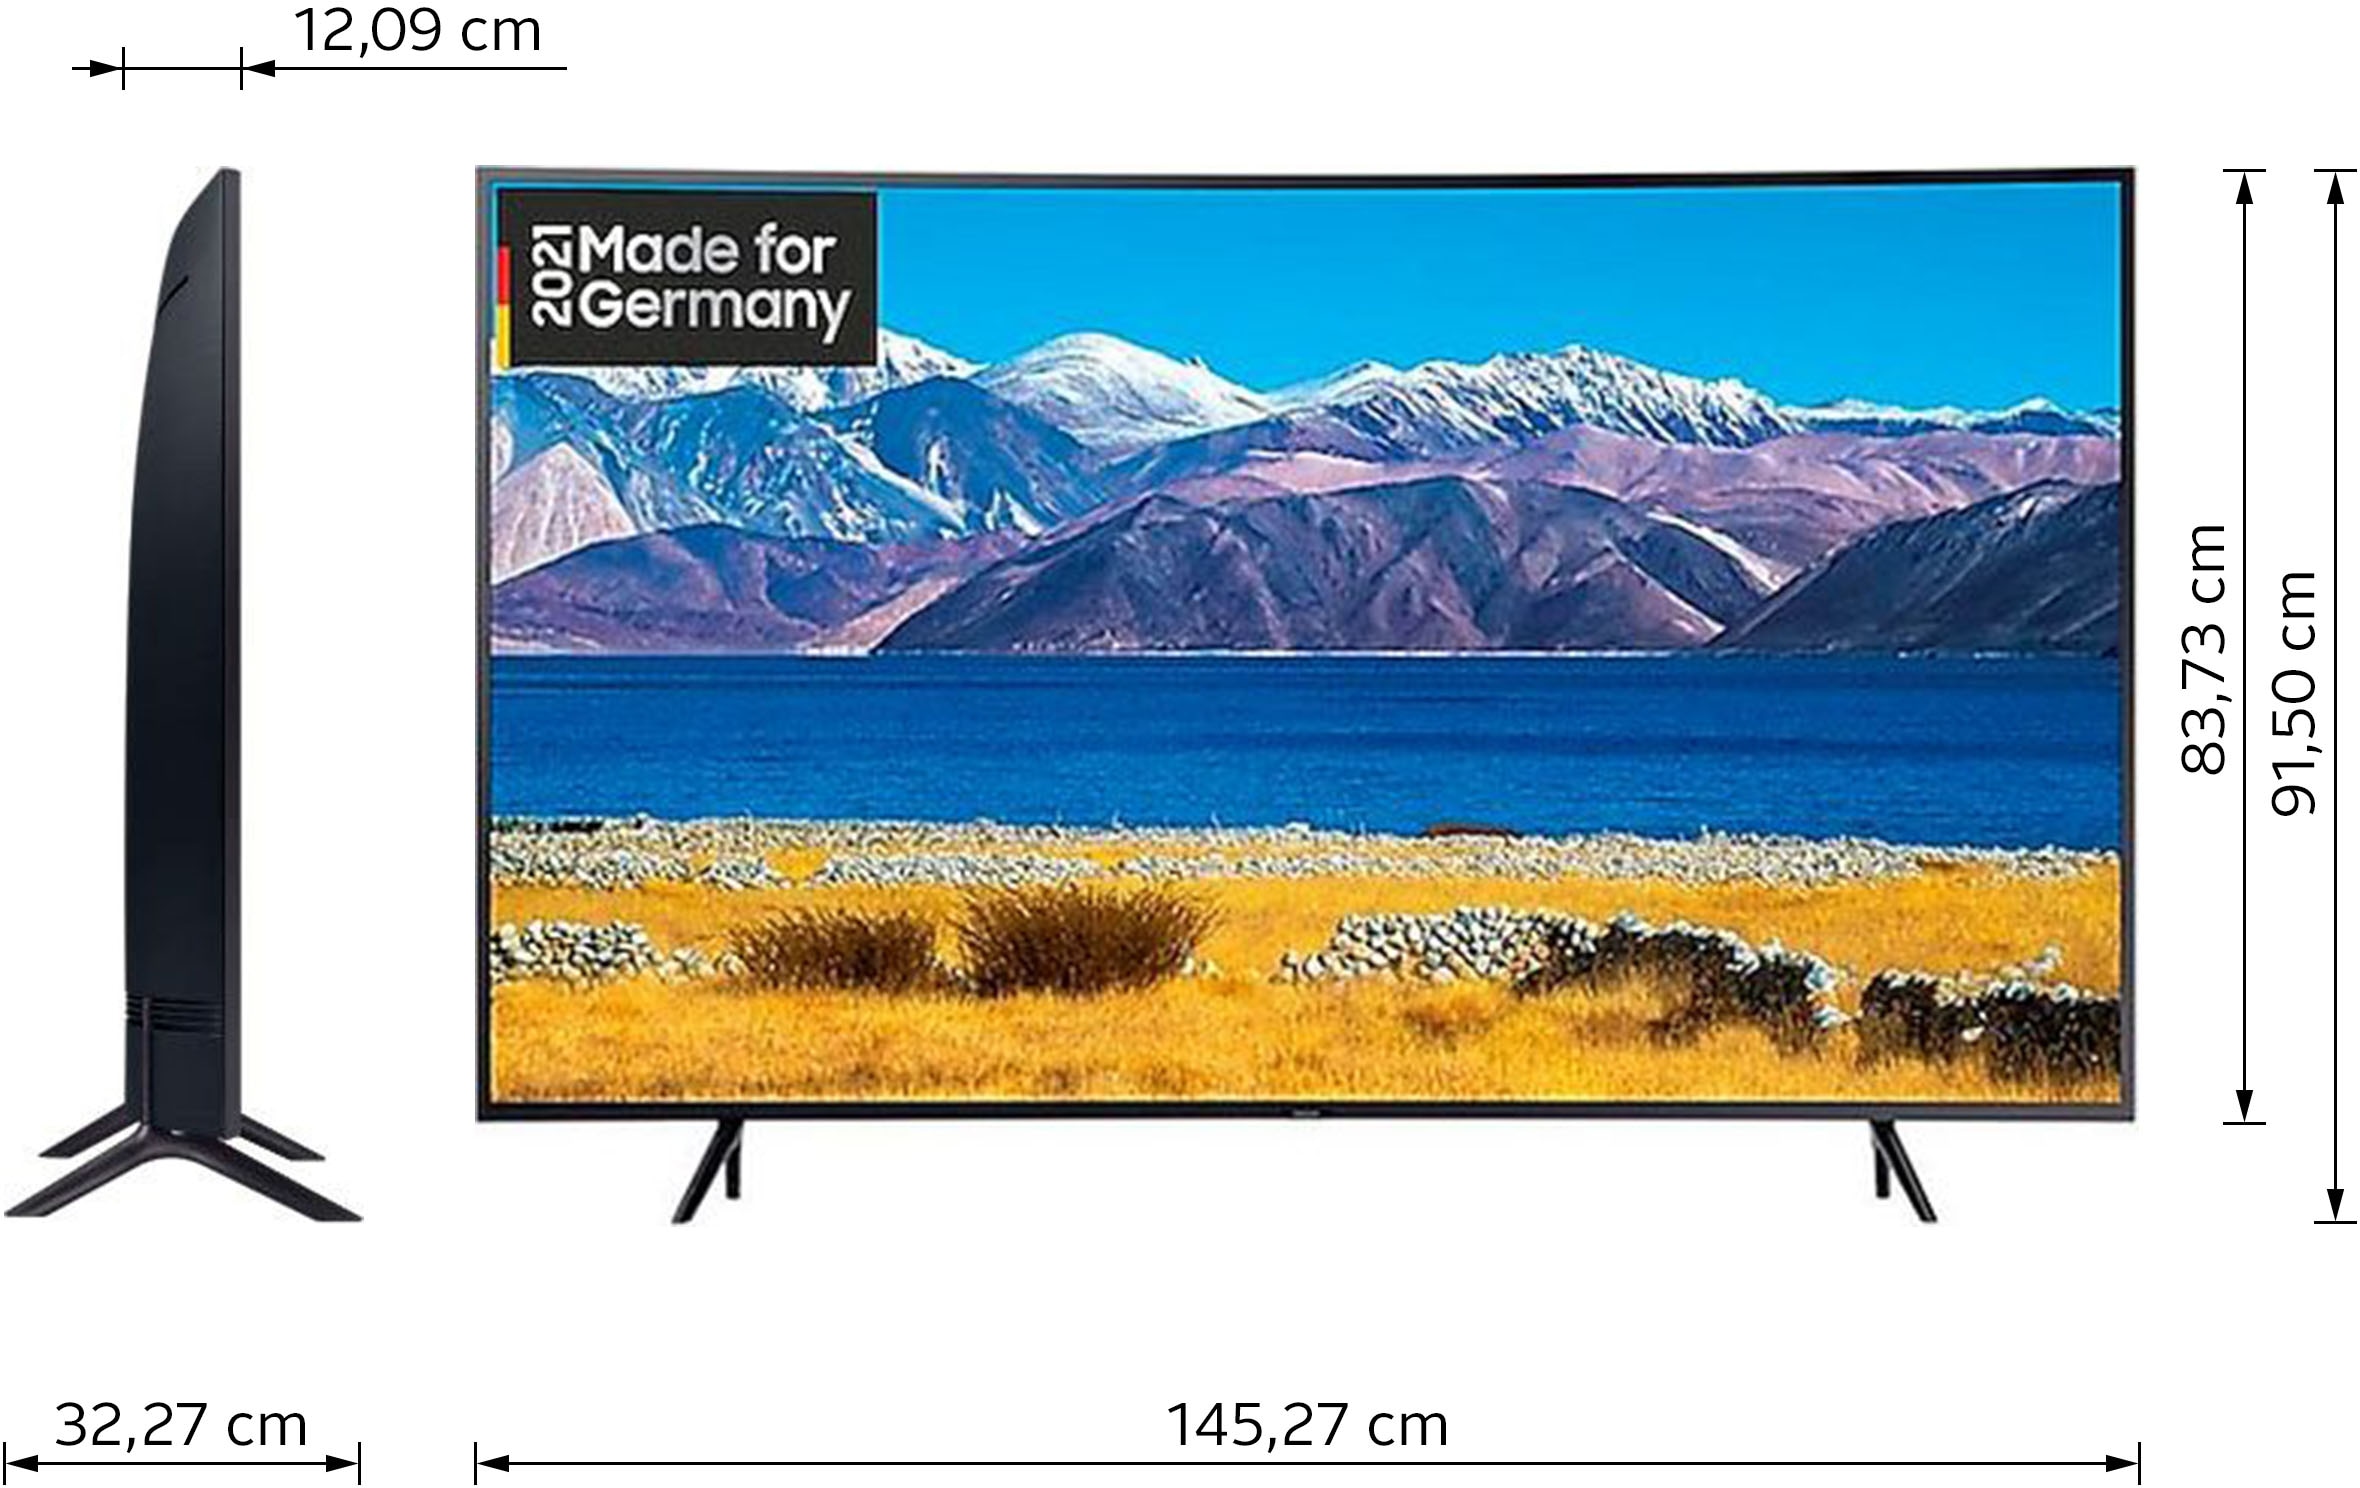 Samsung Curved-LED-Fernseher, 163 cm/65 Zoll, 4K Ultra HD, Smart-TV, HDR,Crystal Prozessor 4K,Crystal Display,Curved Screen